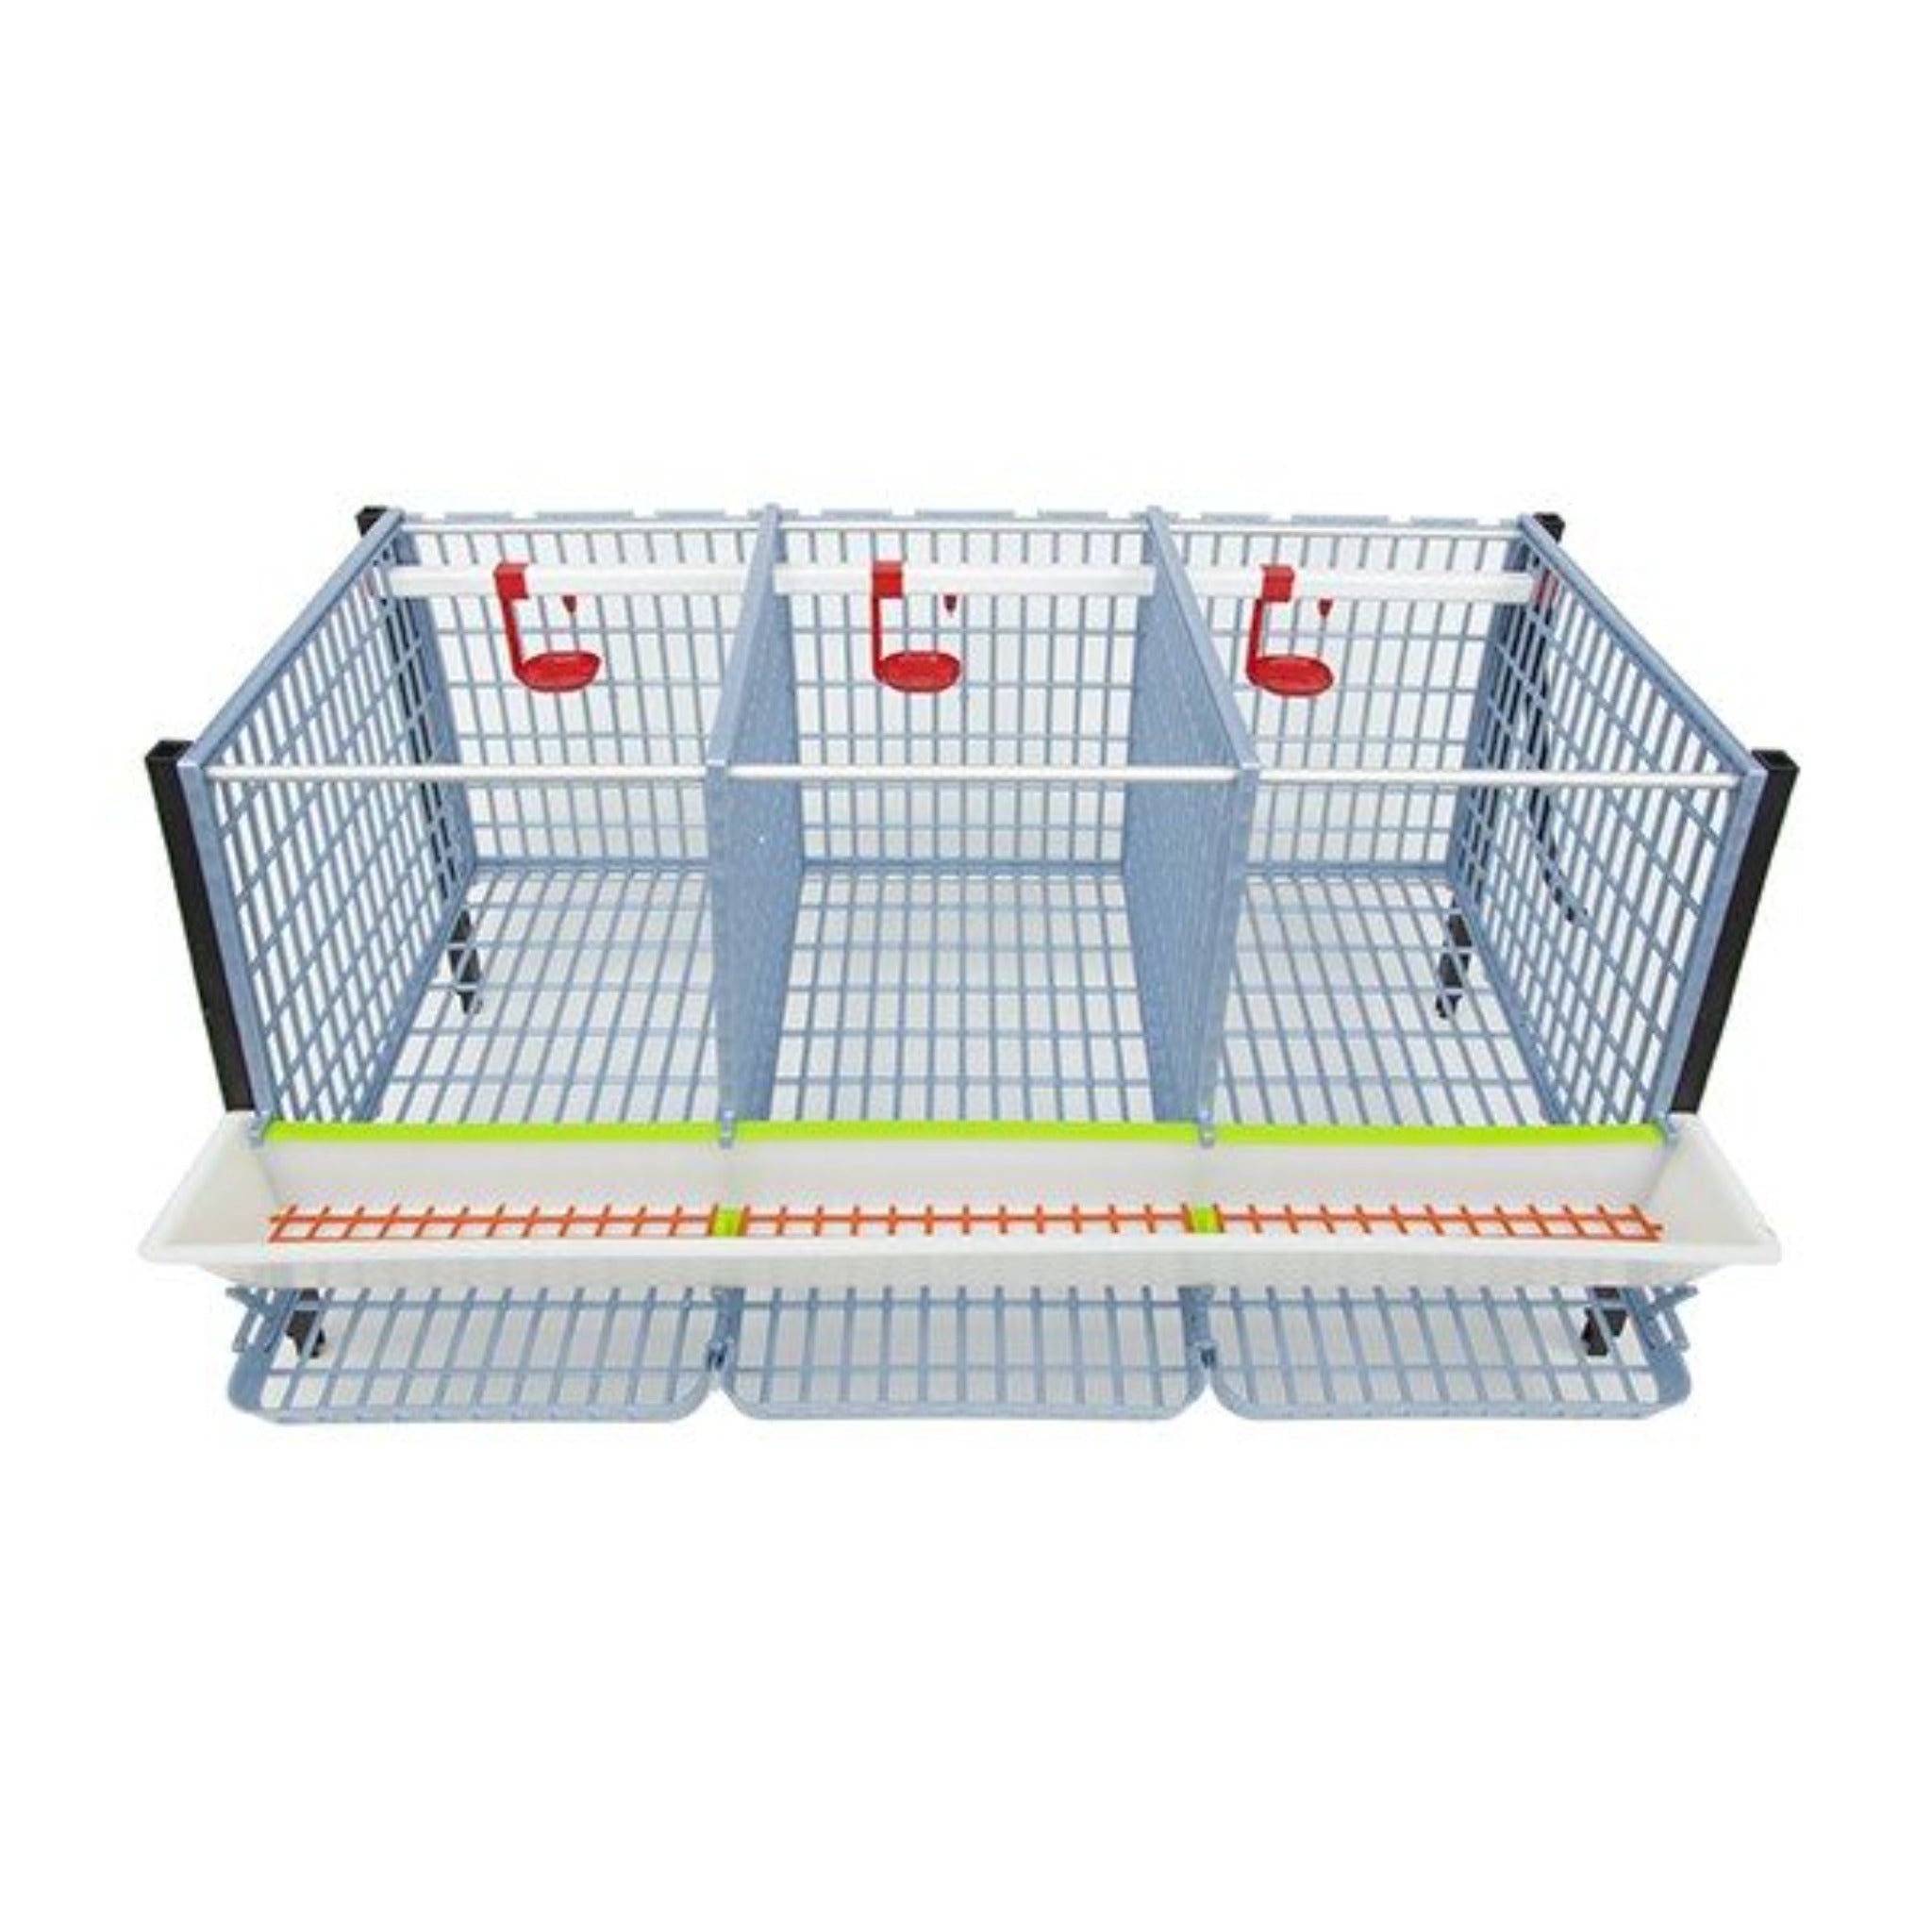 Hatching Time Cimuka. TYK40 15” Chicken cage 4 layer. Image shows chicken cage from front and above. Roof and front walls are removed to show inside of cage. Roll out egg trays can be seen on front under feeding trough. Automatic drinker system is seen on back wall of cage.